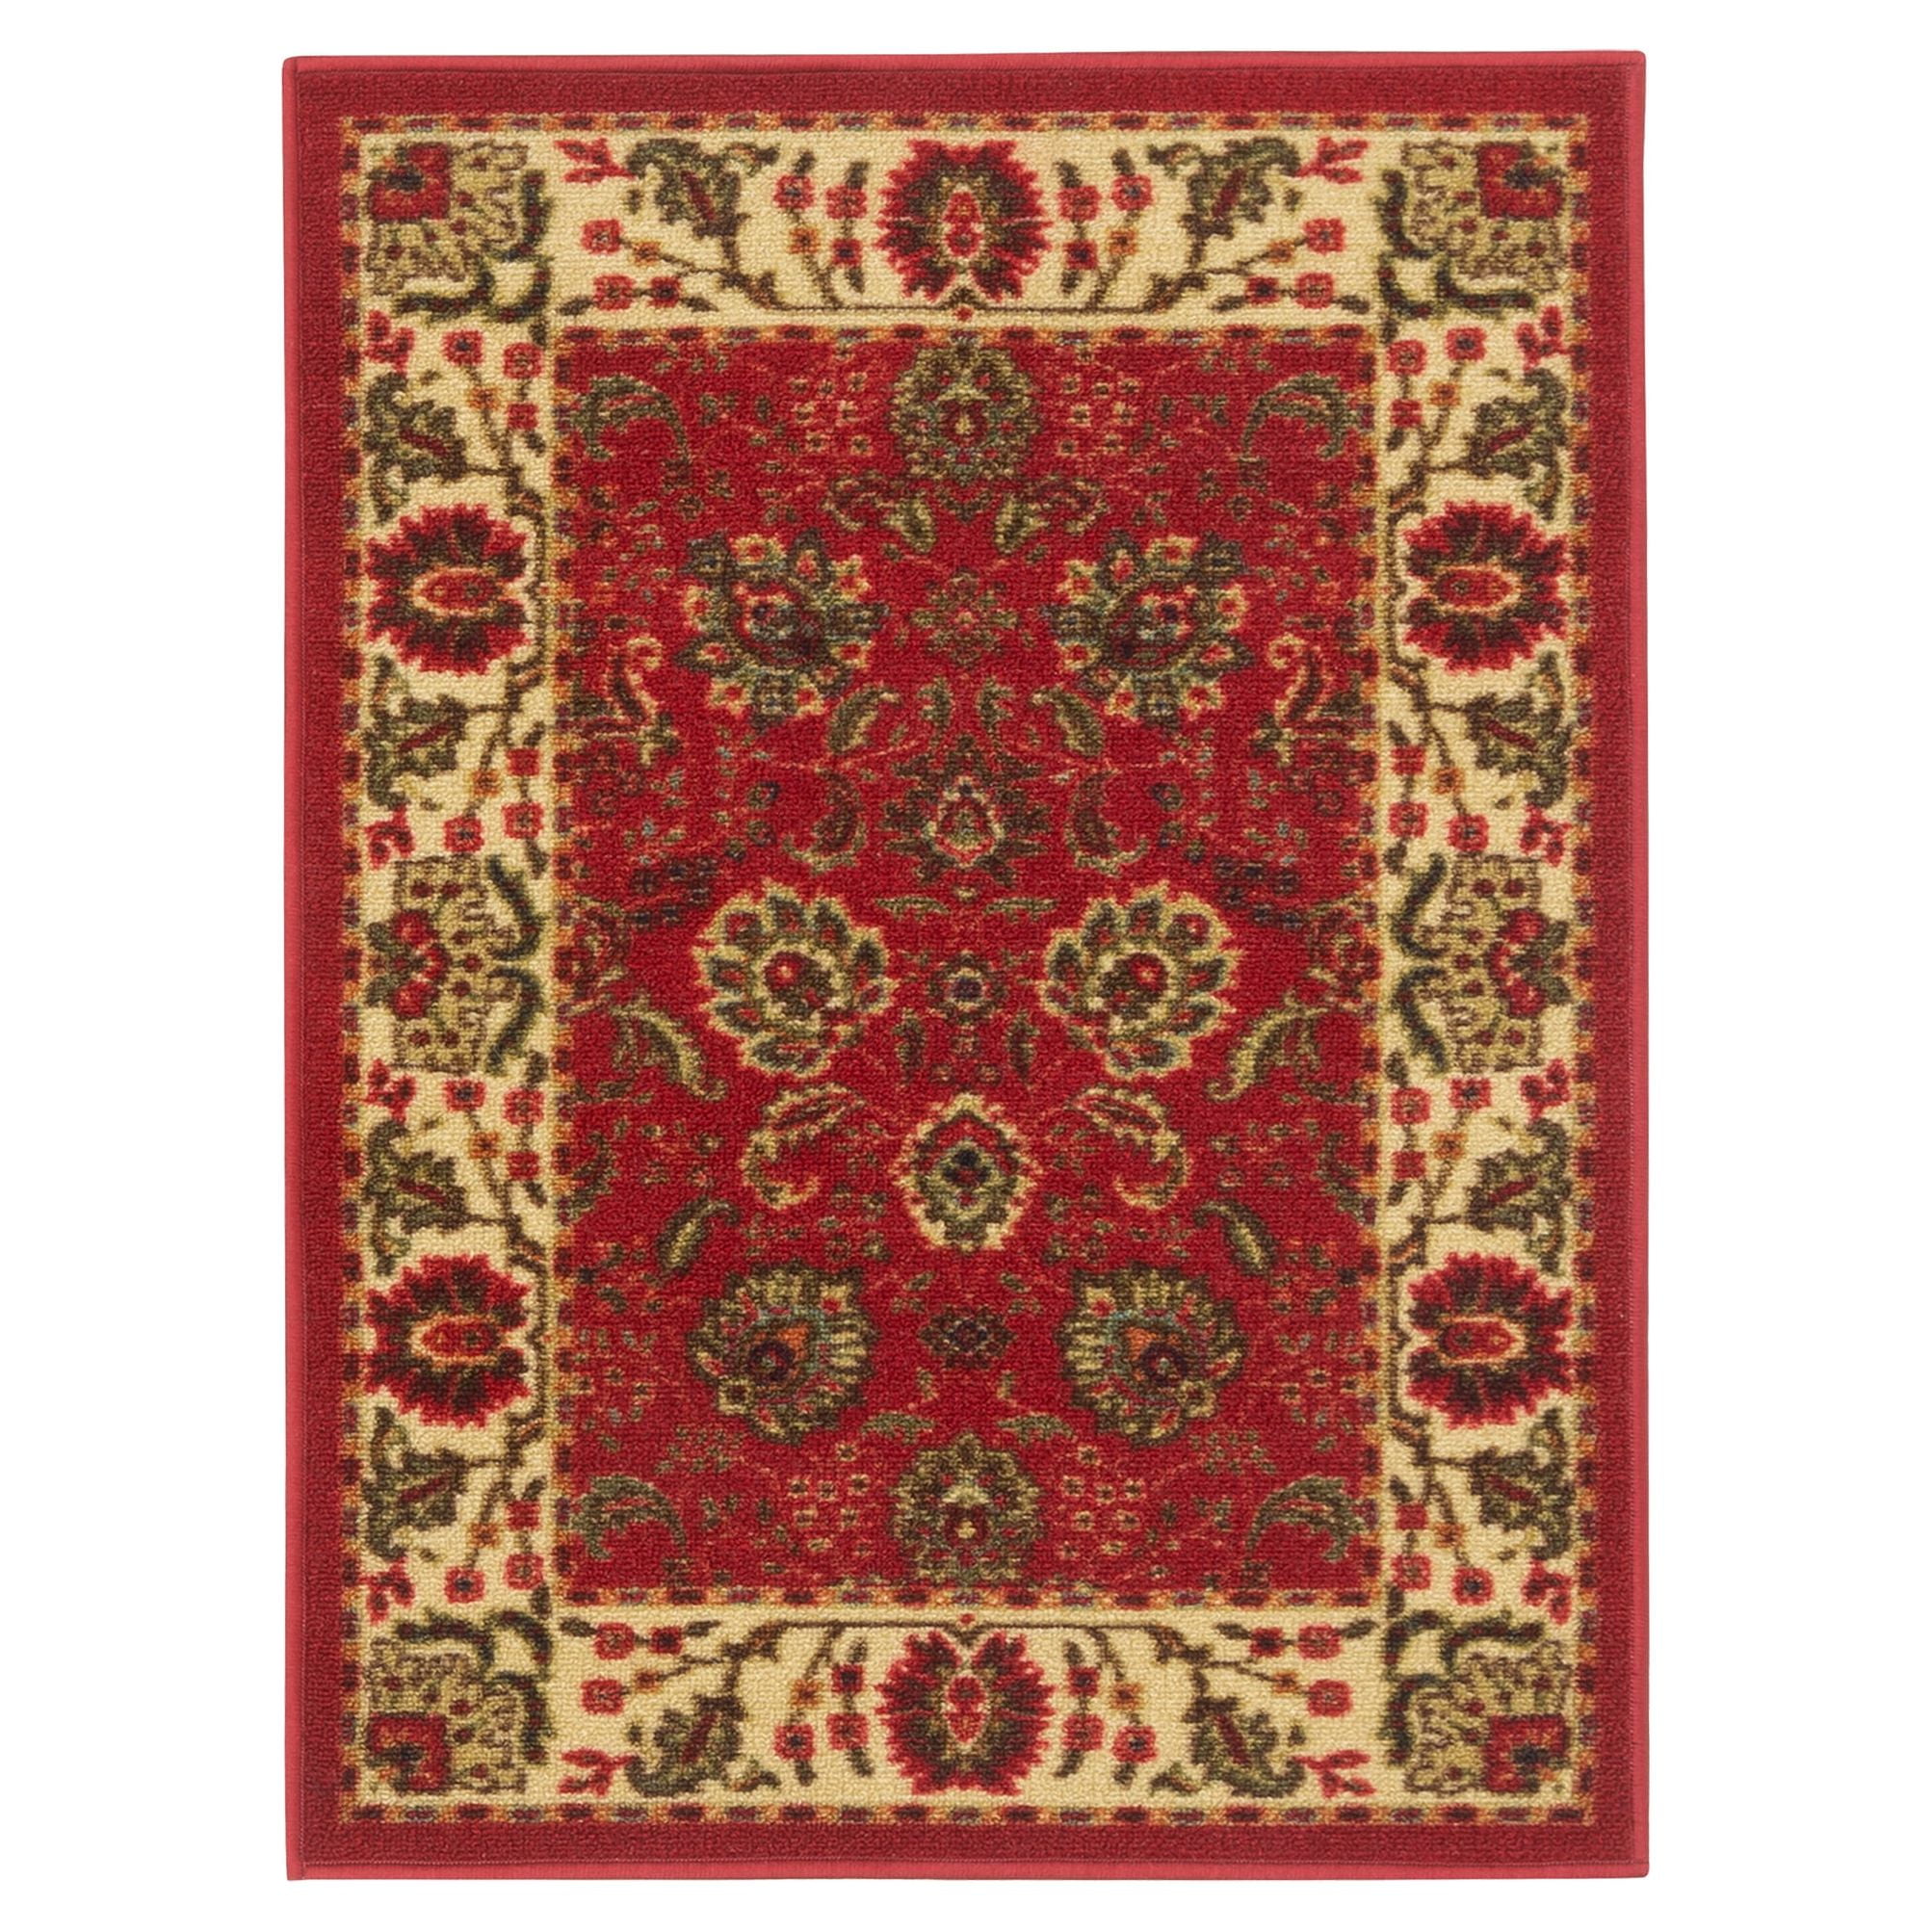 Maxy Home Rubber Backed Non Slip Rugs and Runners Boxes Floral Beige Red -  3'3 x 5' 